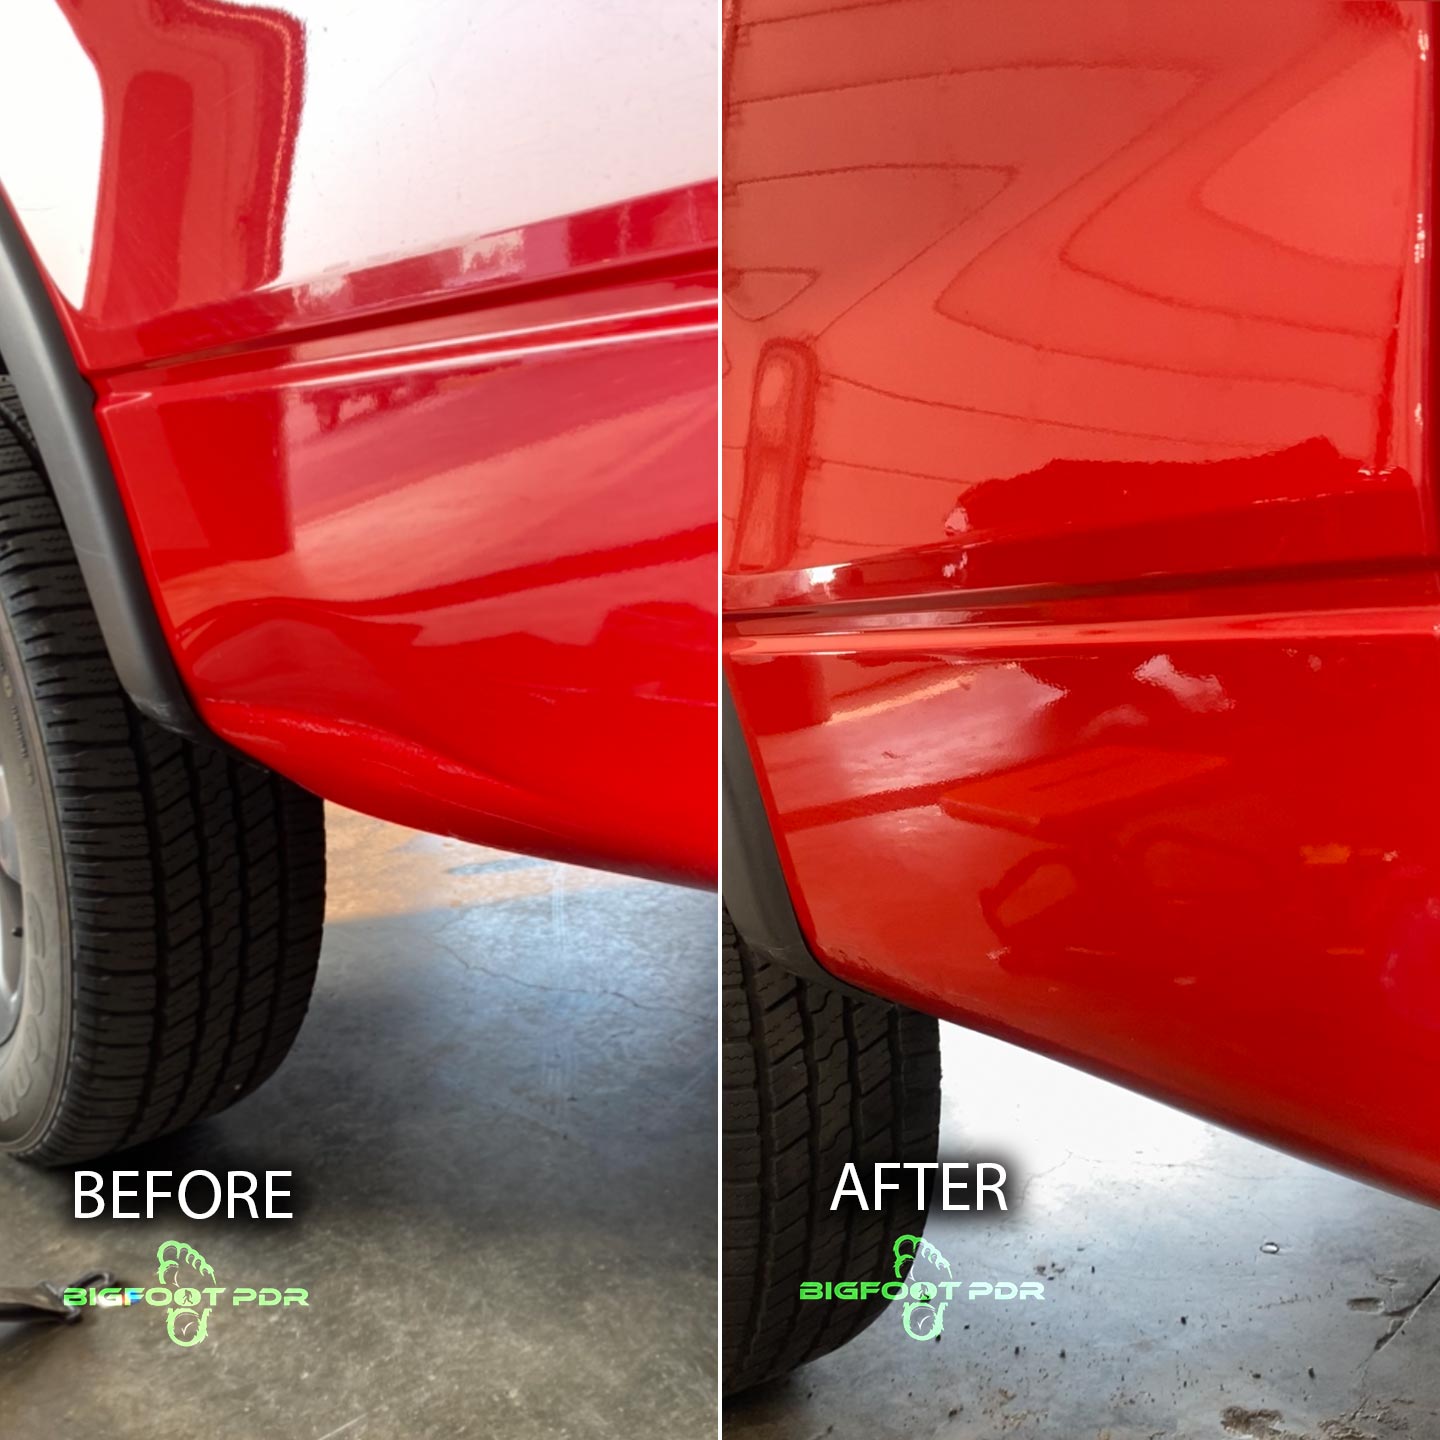 paintless dent removal kalispell mt - Bigfoot PDR